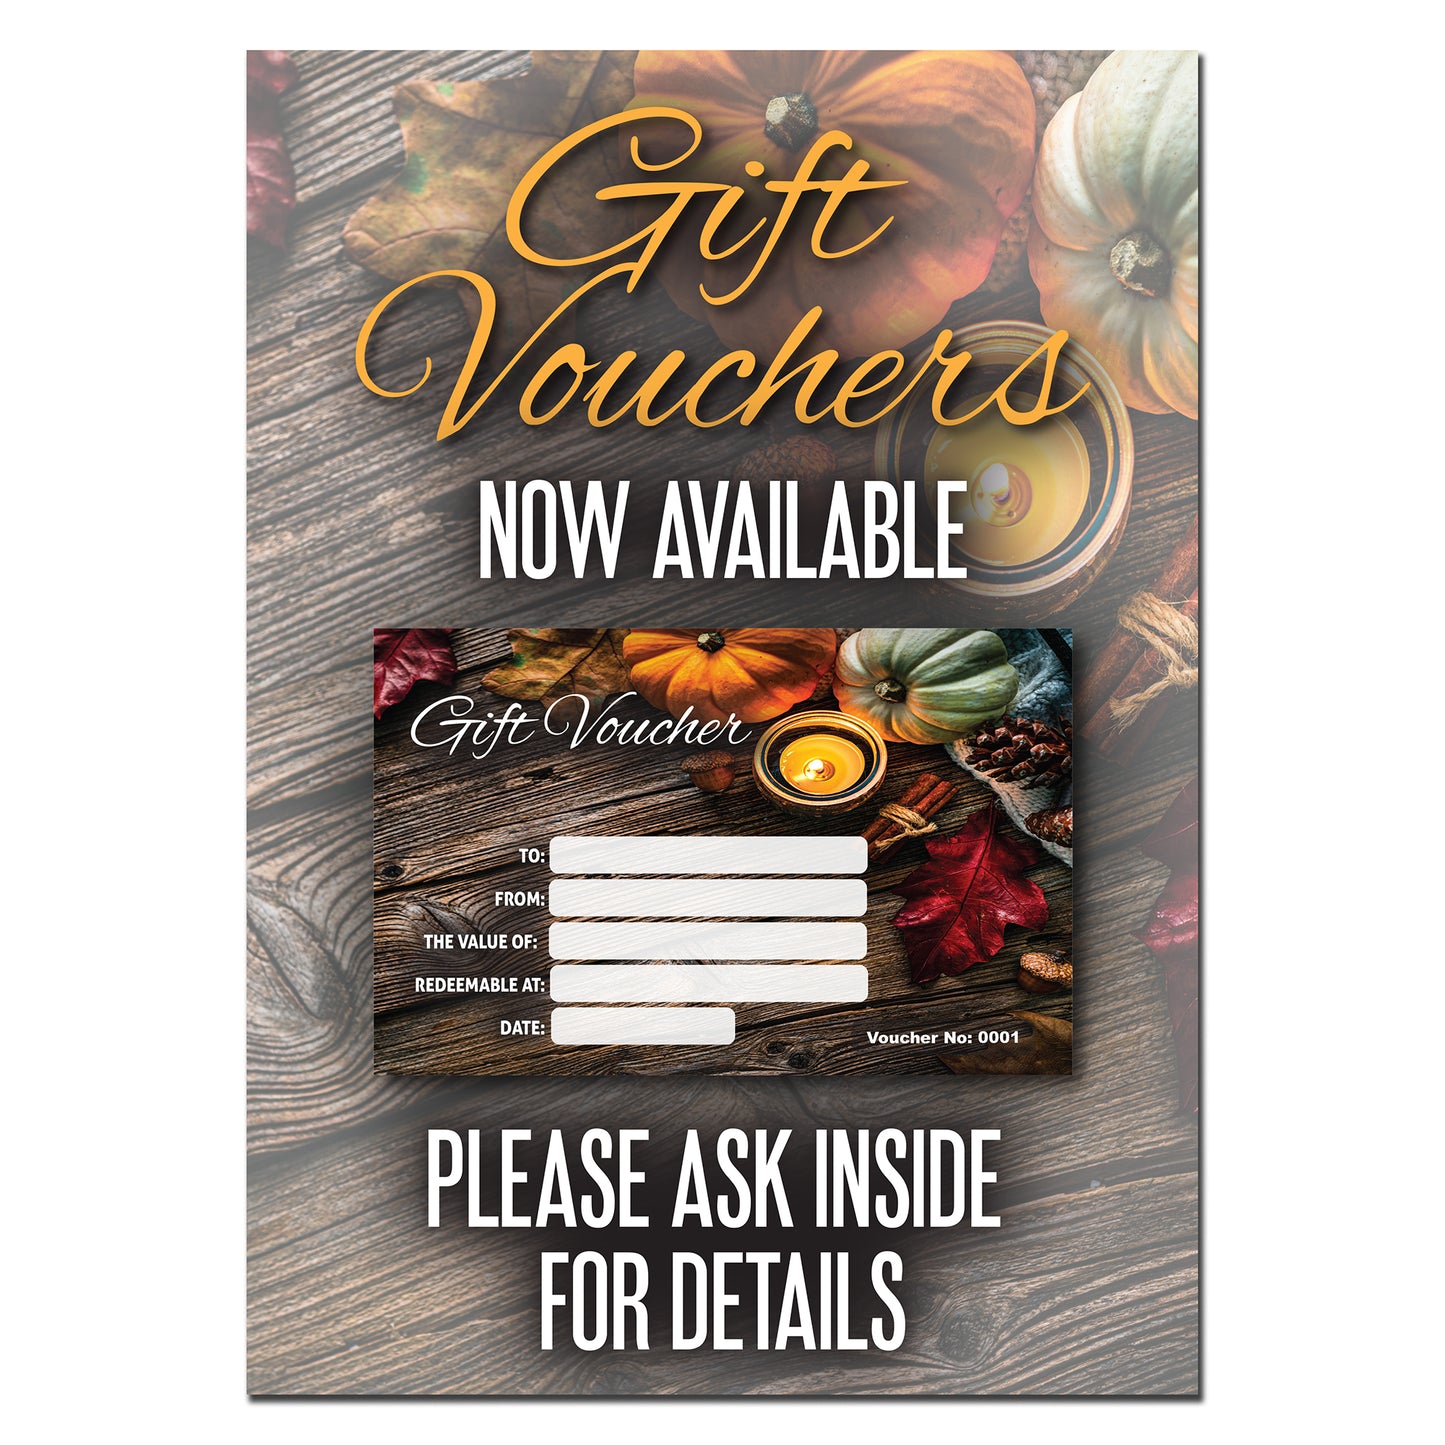 Autumn Gift Voucher Book 99mm x 210mm with FREE A4 POSTER